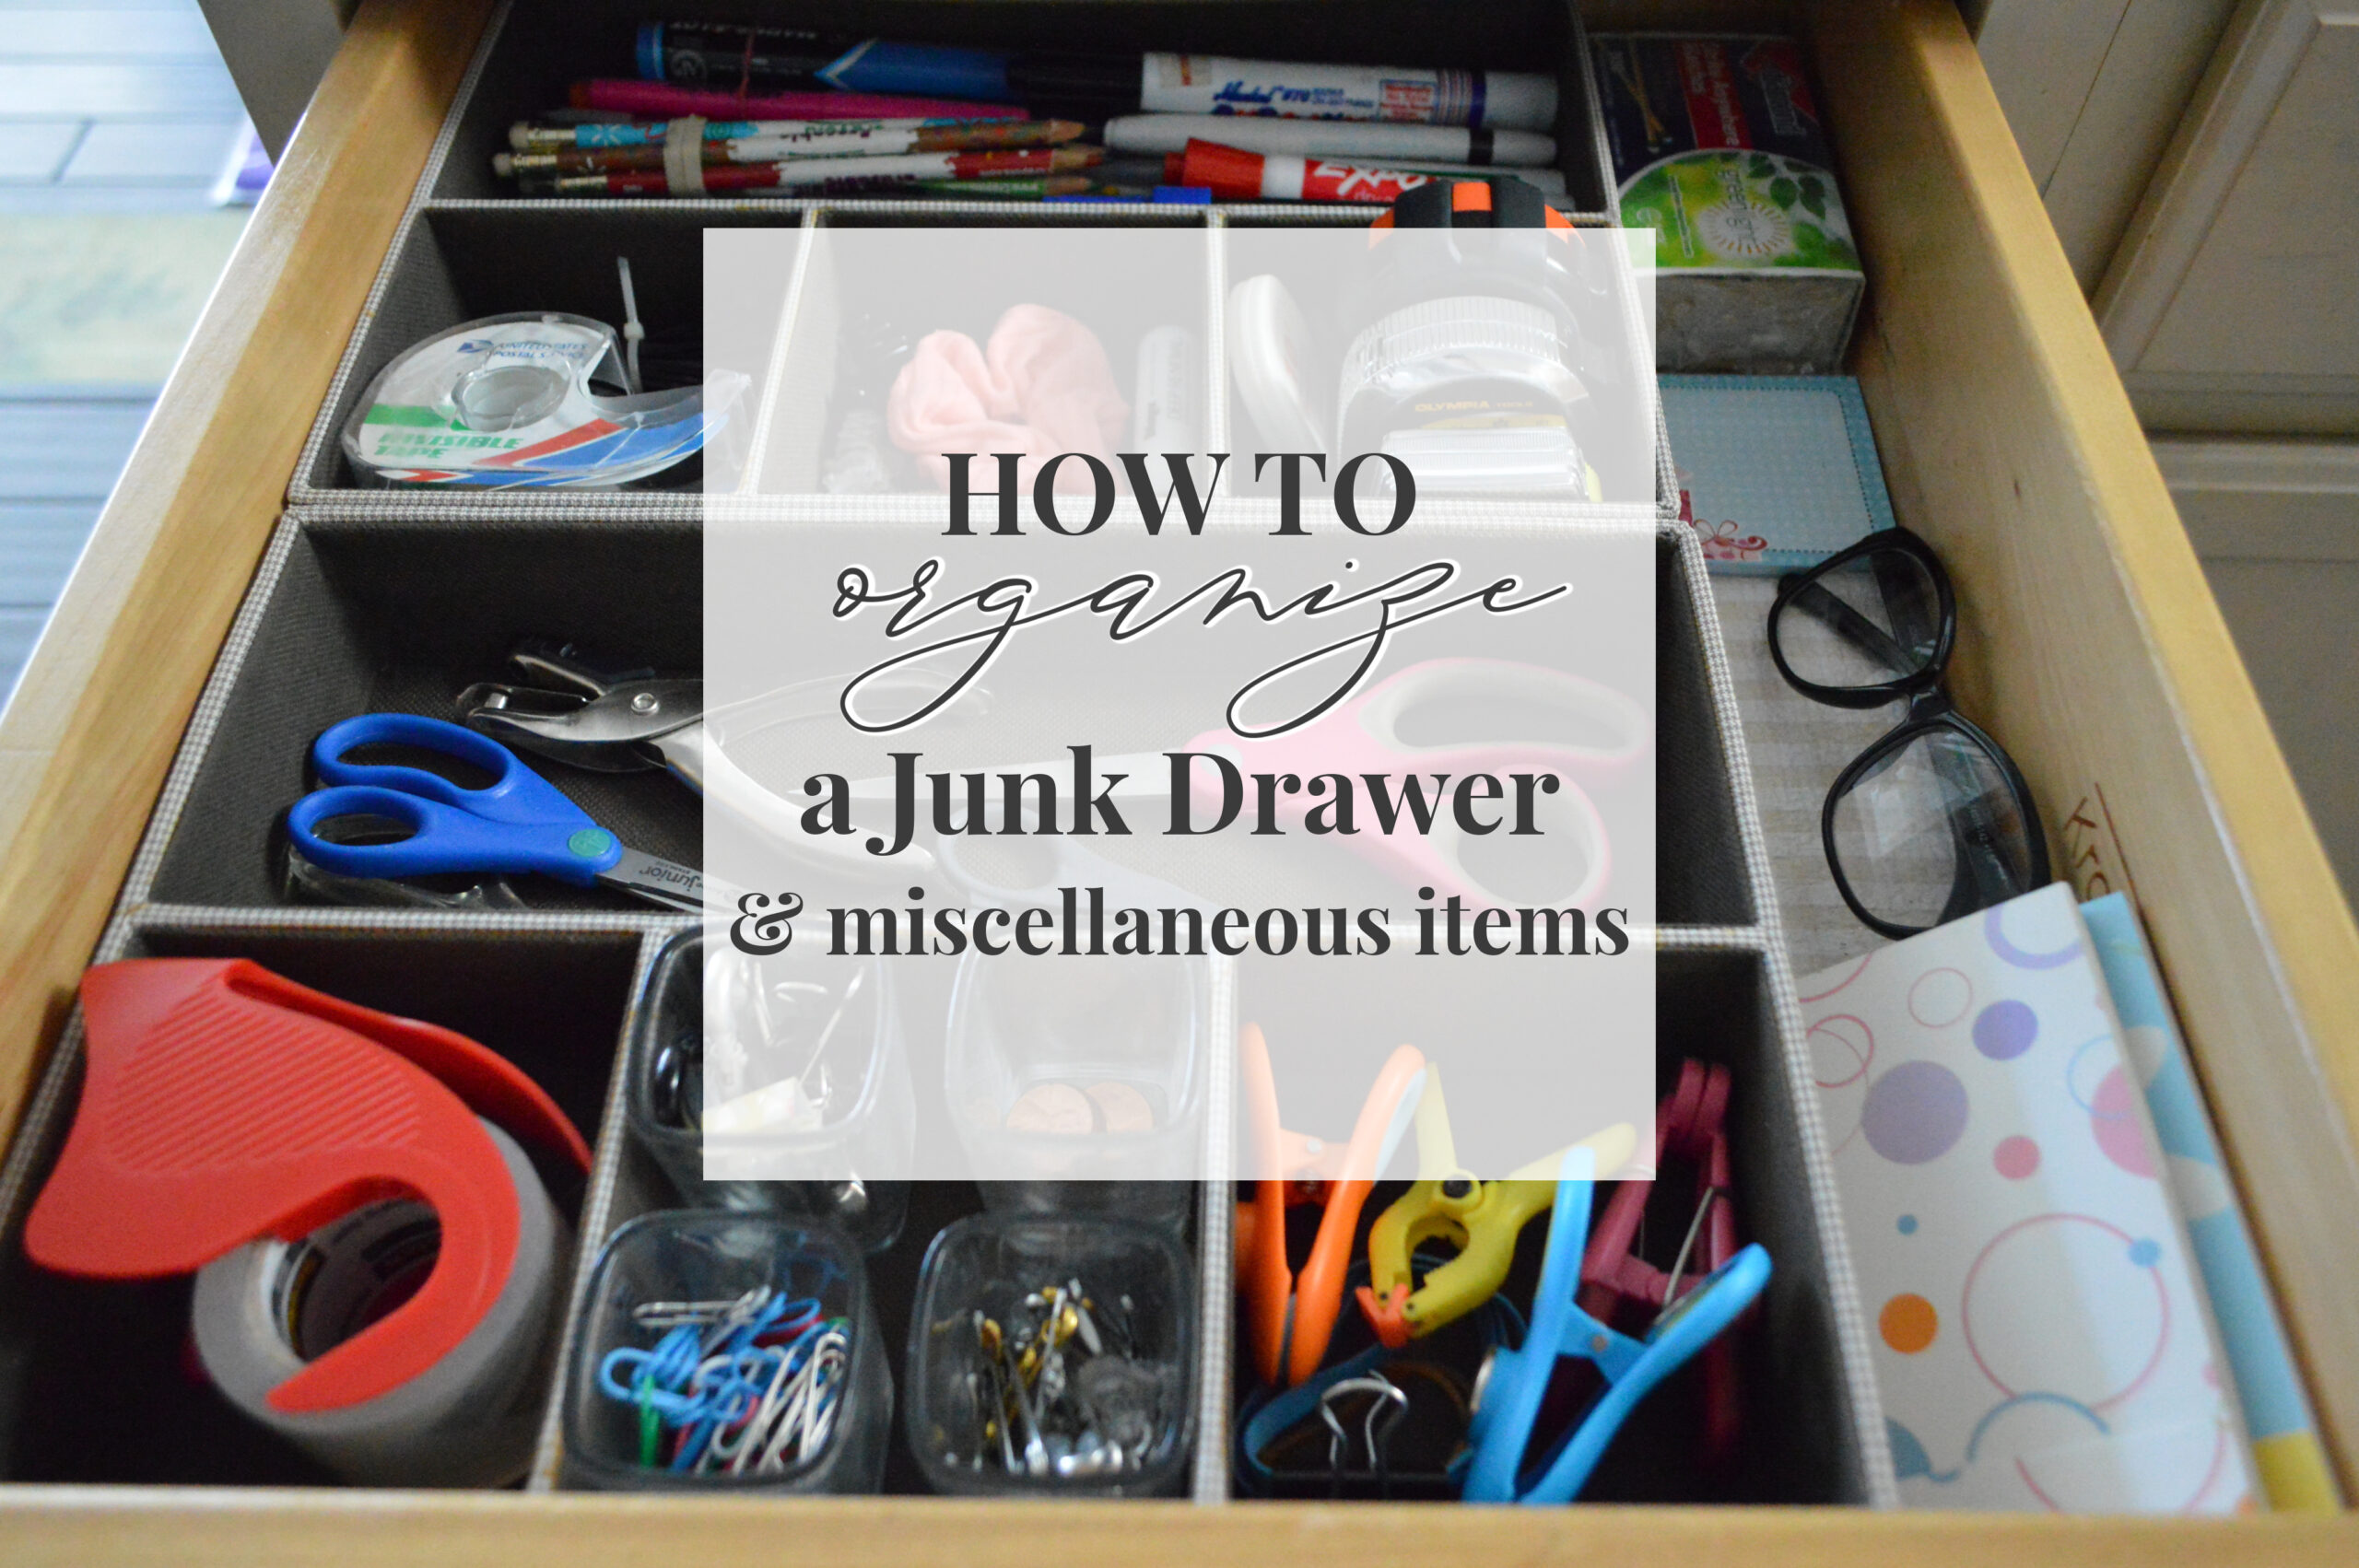 https://foxhollowcottage.com/wp-content/uploads/2021/01/how-to-organize-a-junk-drawer-and-miscellaneous-items-foxhollowcottage.com-simple-affordable-organizing-ideas-scaled.jpg